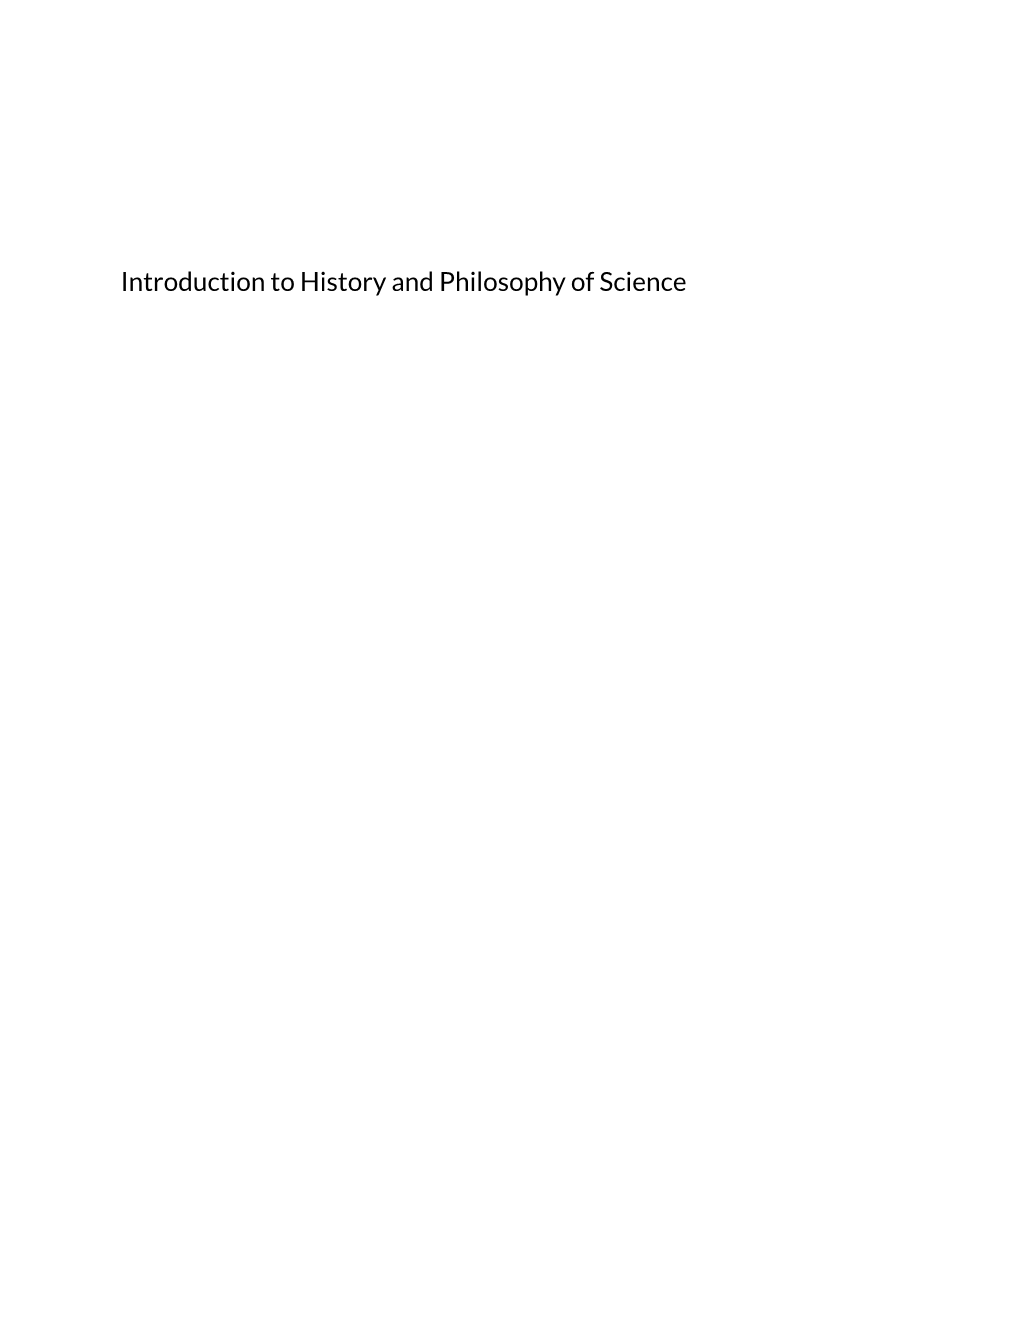 Introduction to History and Philosophy of Science